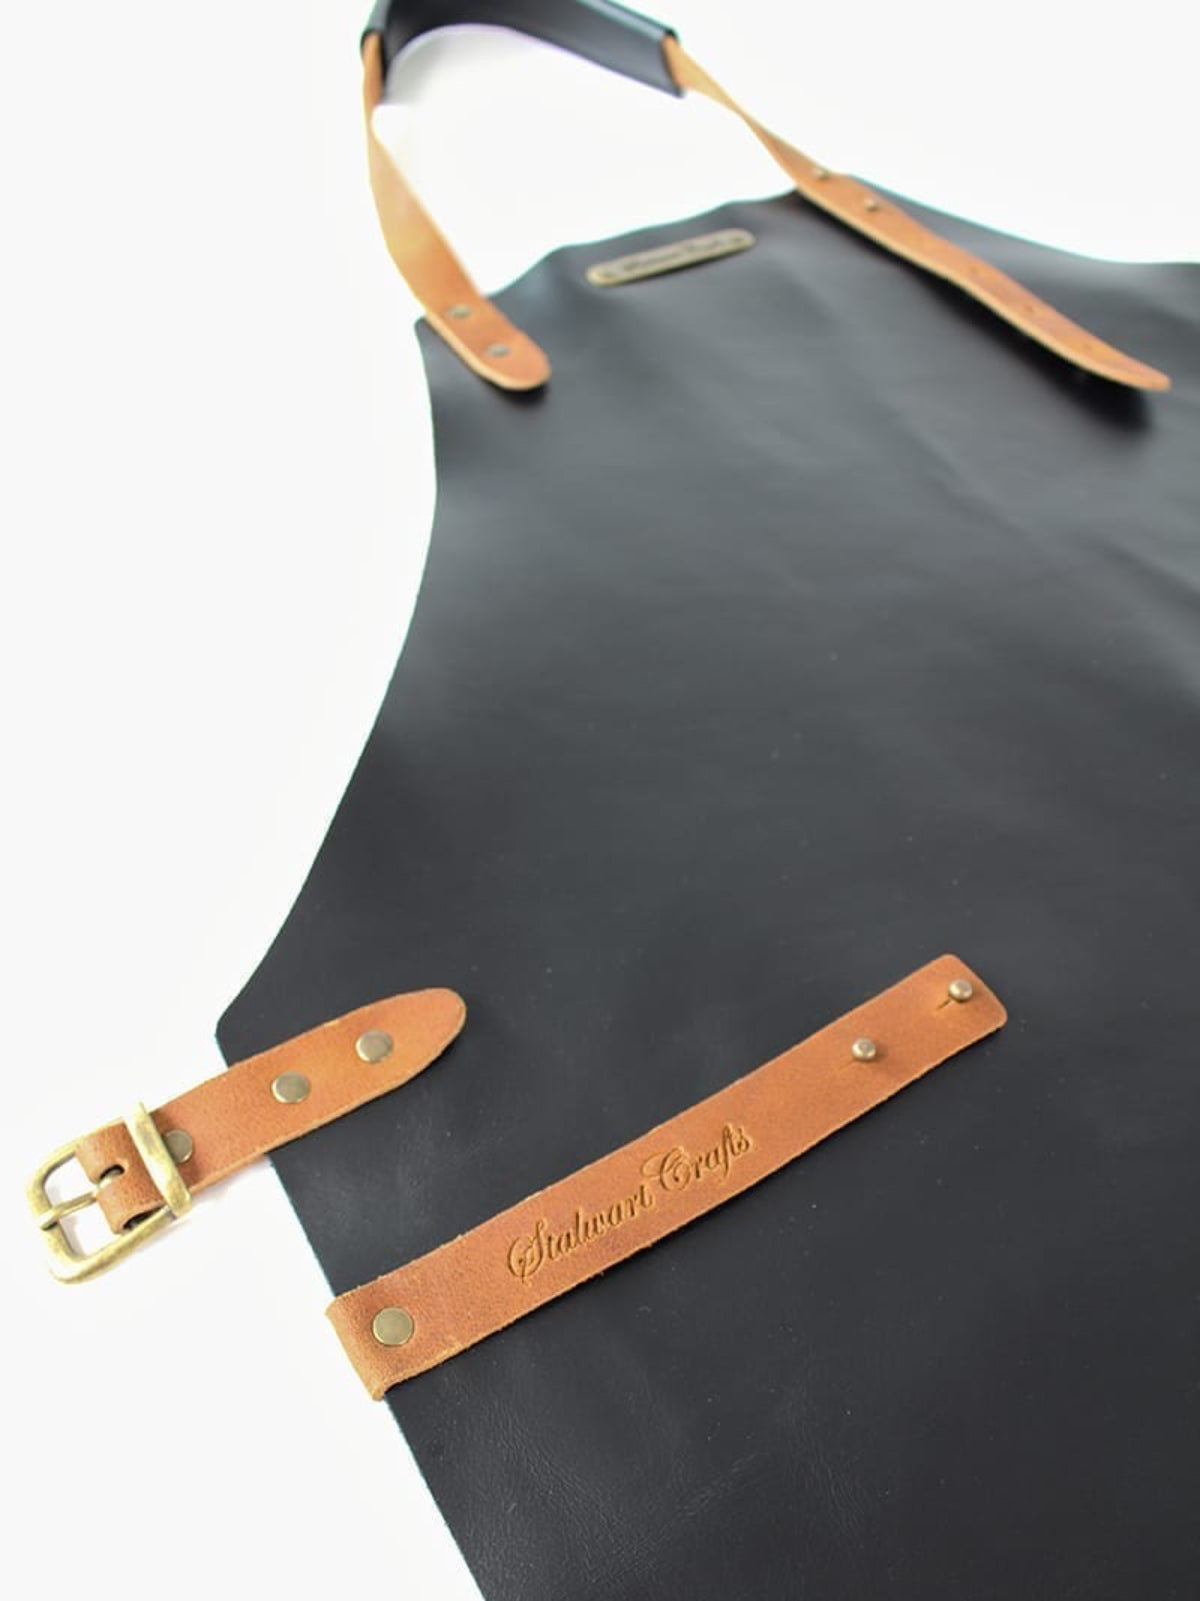 Leather Apron Basic Black by STW -  ChefsCotton